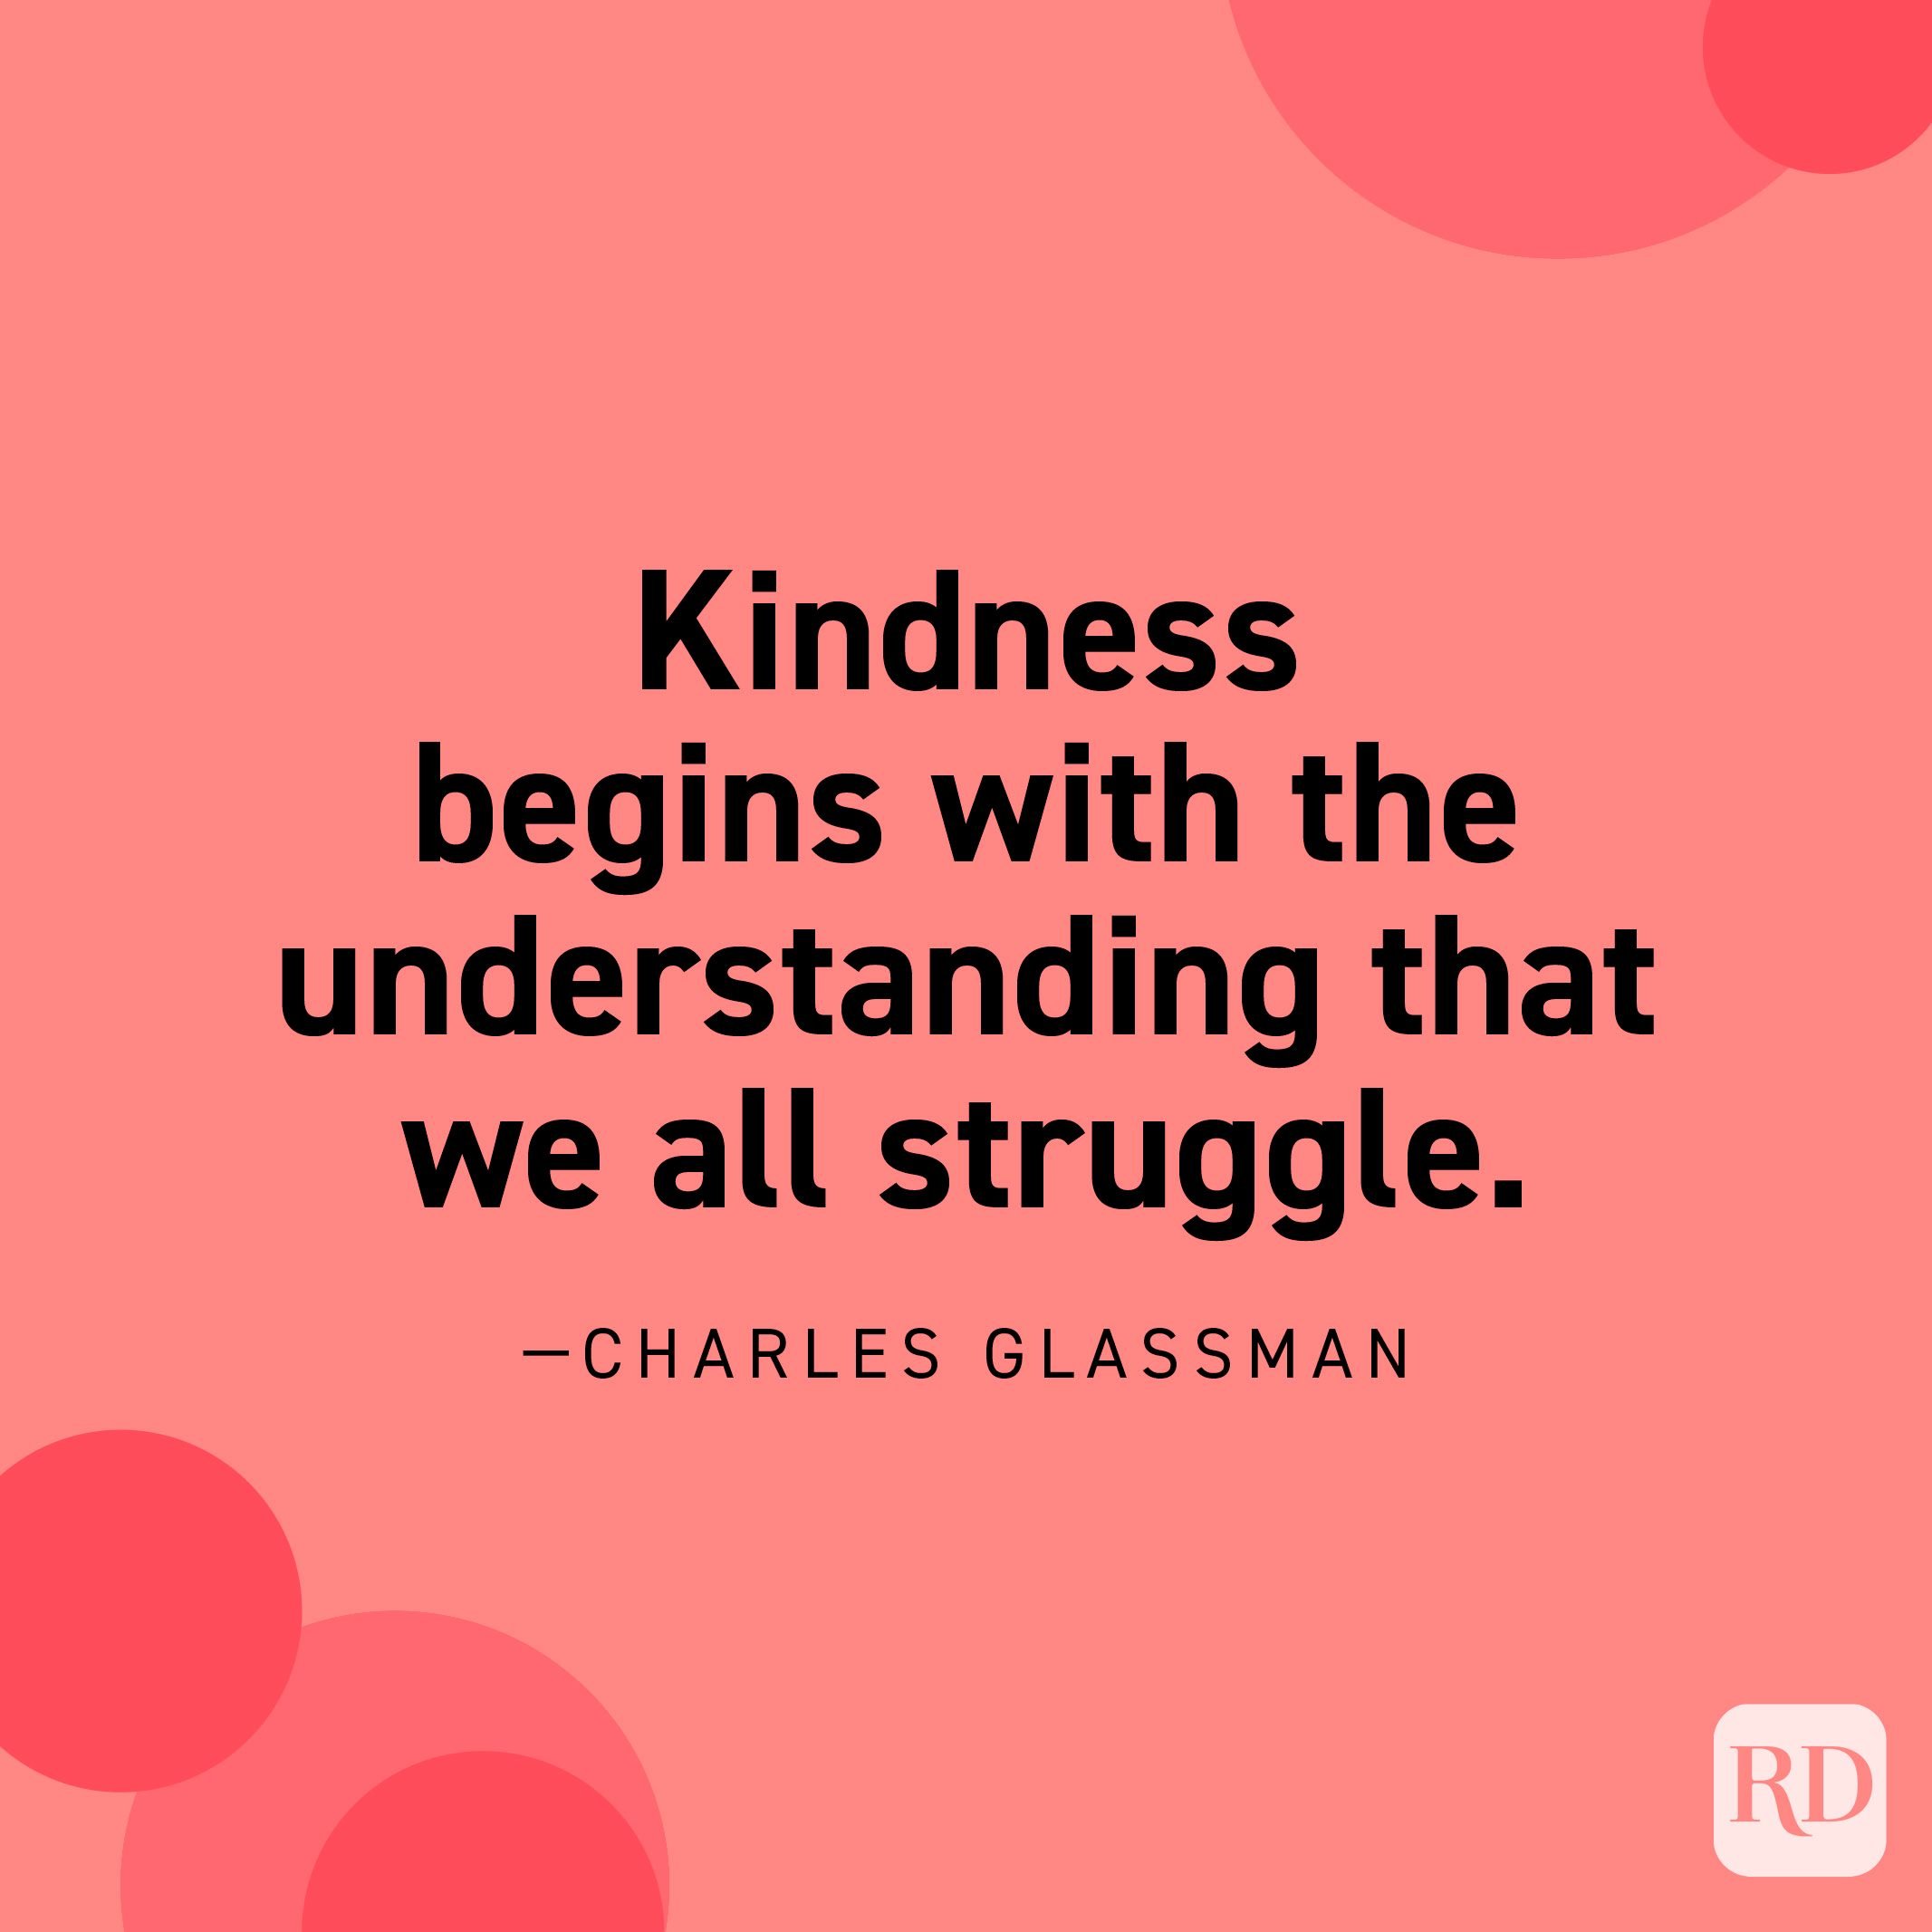 60 Powerful Kindness Quotes That Will Stay with You